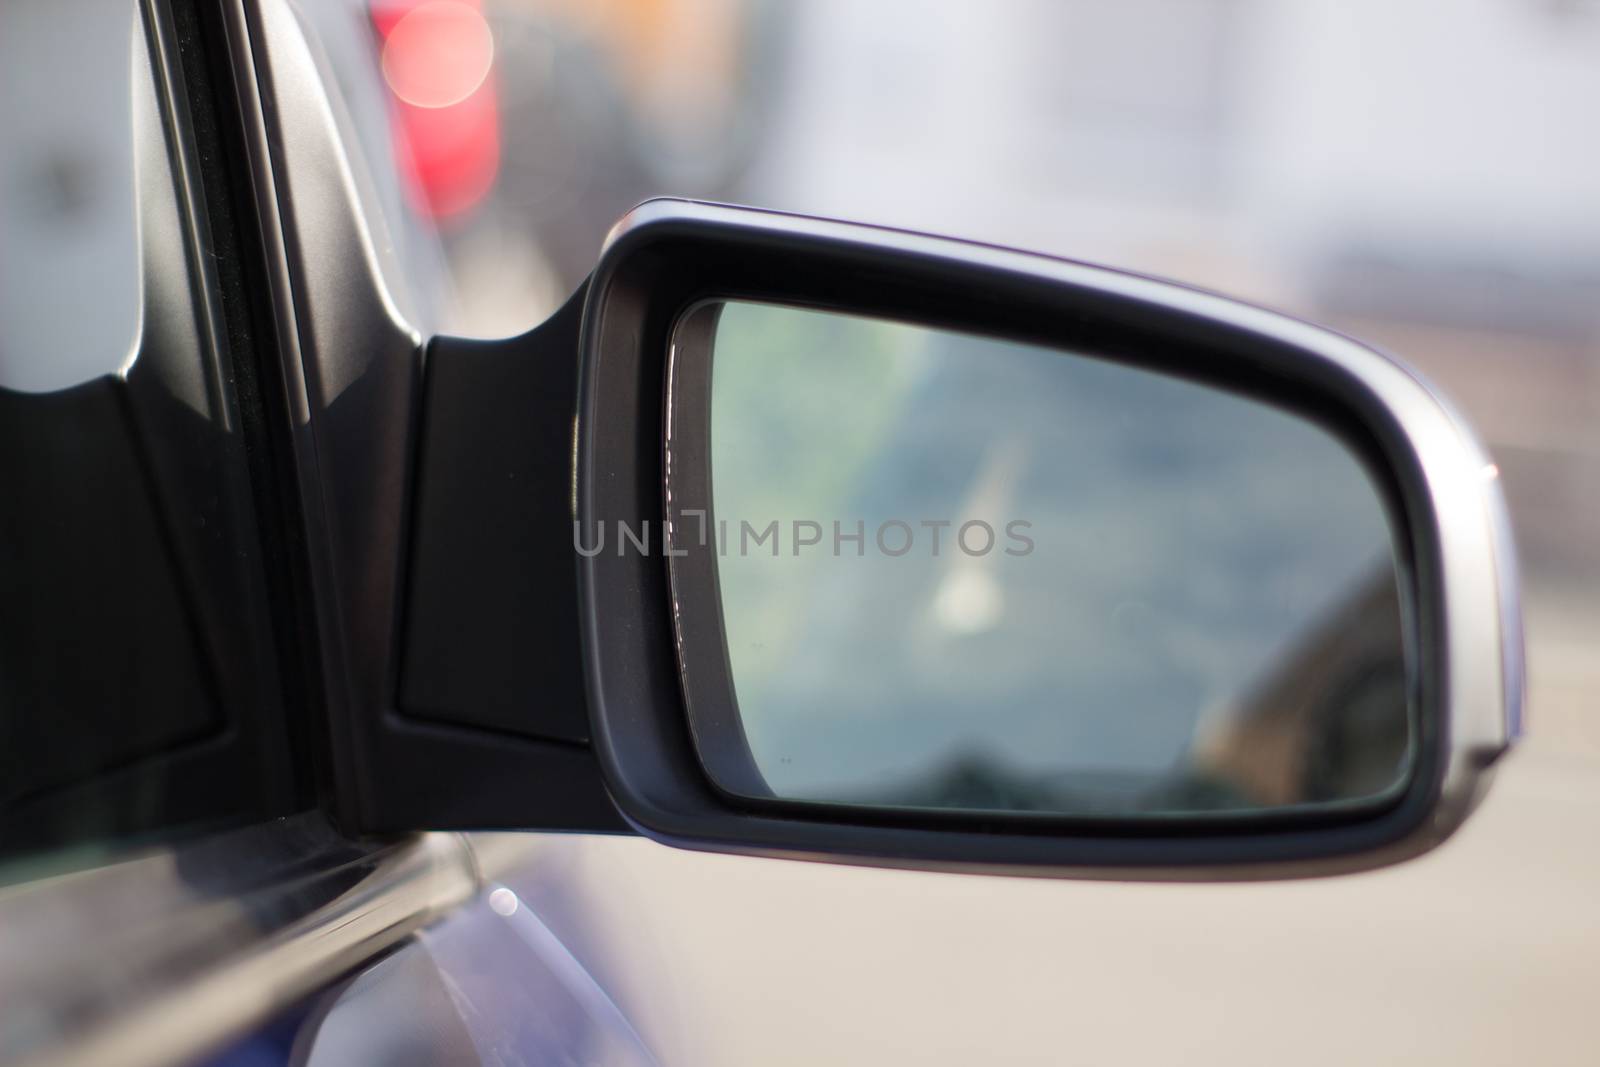 Landscape in the sideview mirror of a speeding car